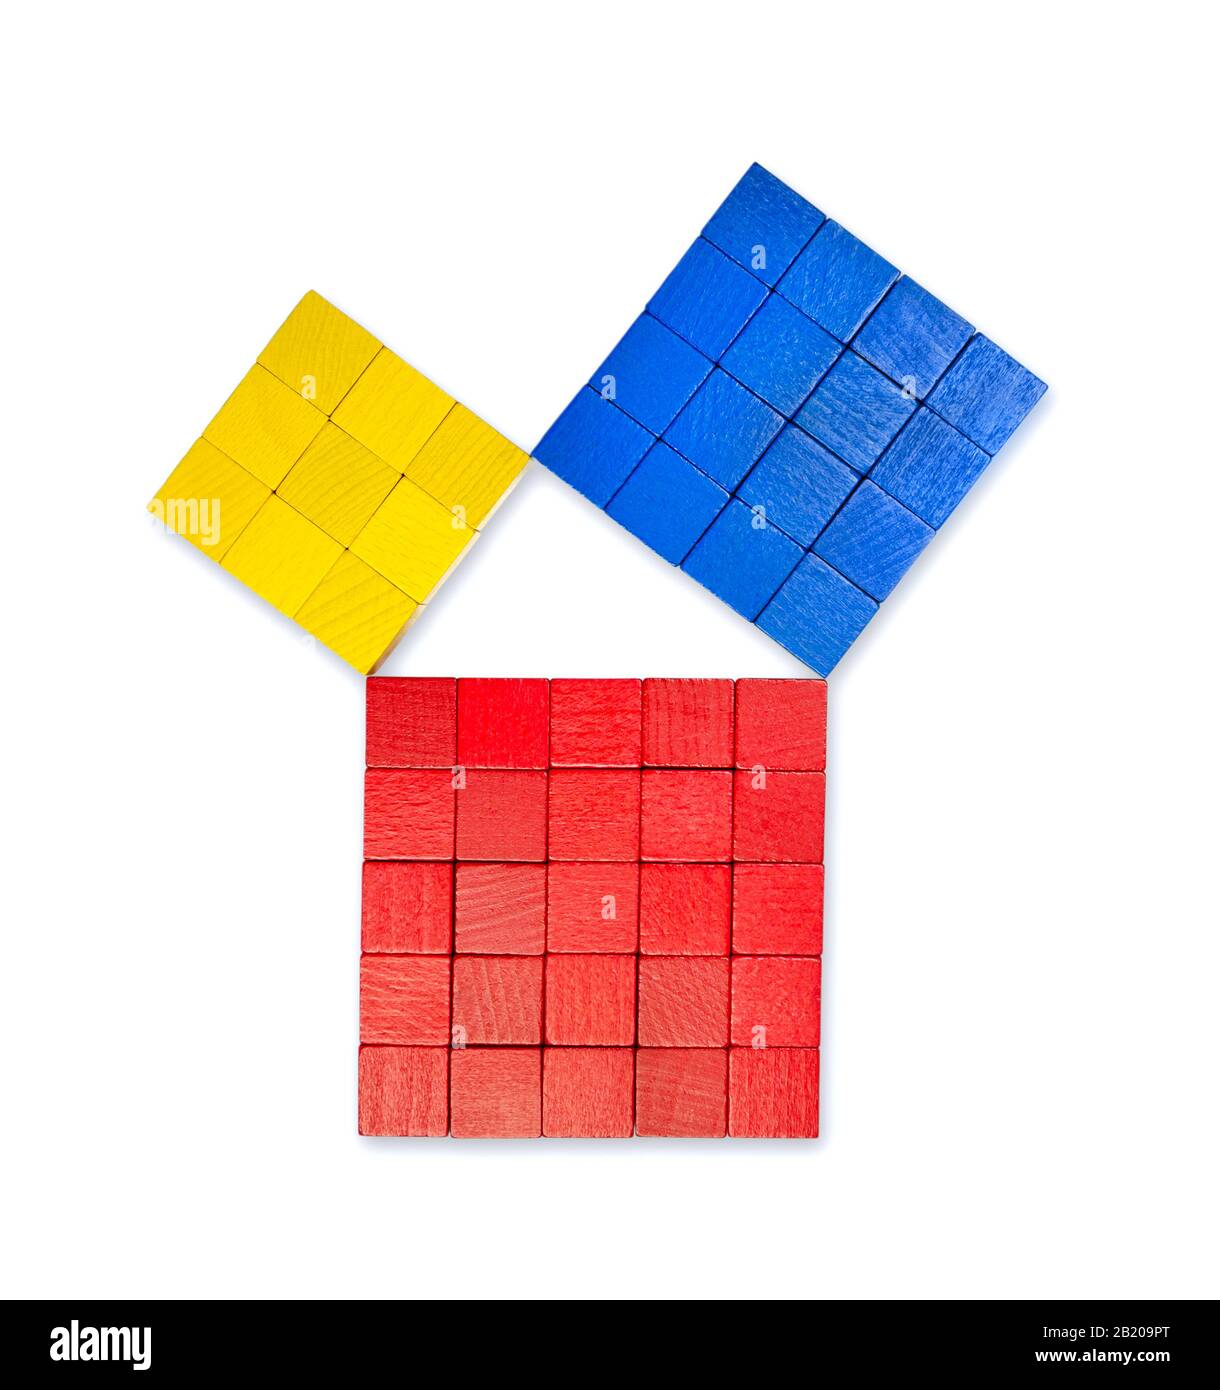 Pythagorean theorem shown with colorful wooden cubes, from above. Pythagoras theorem. Relation of sides of a right triangle. Stock Photo